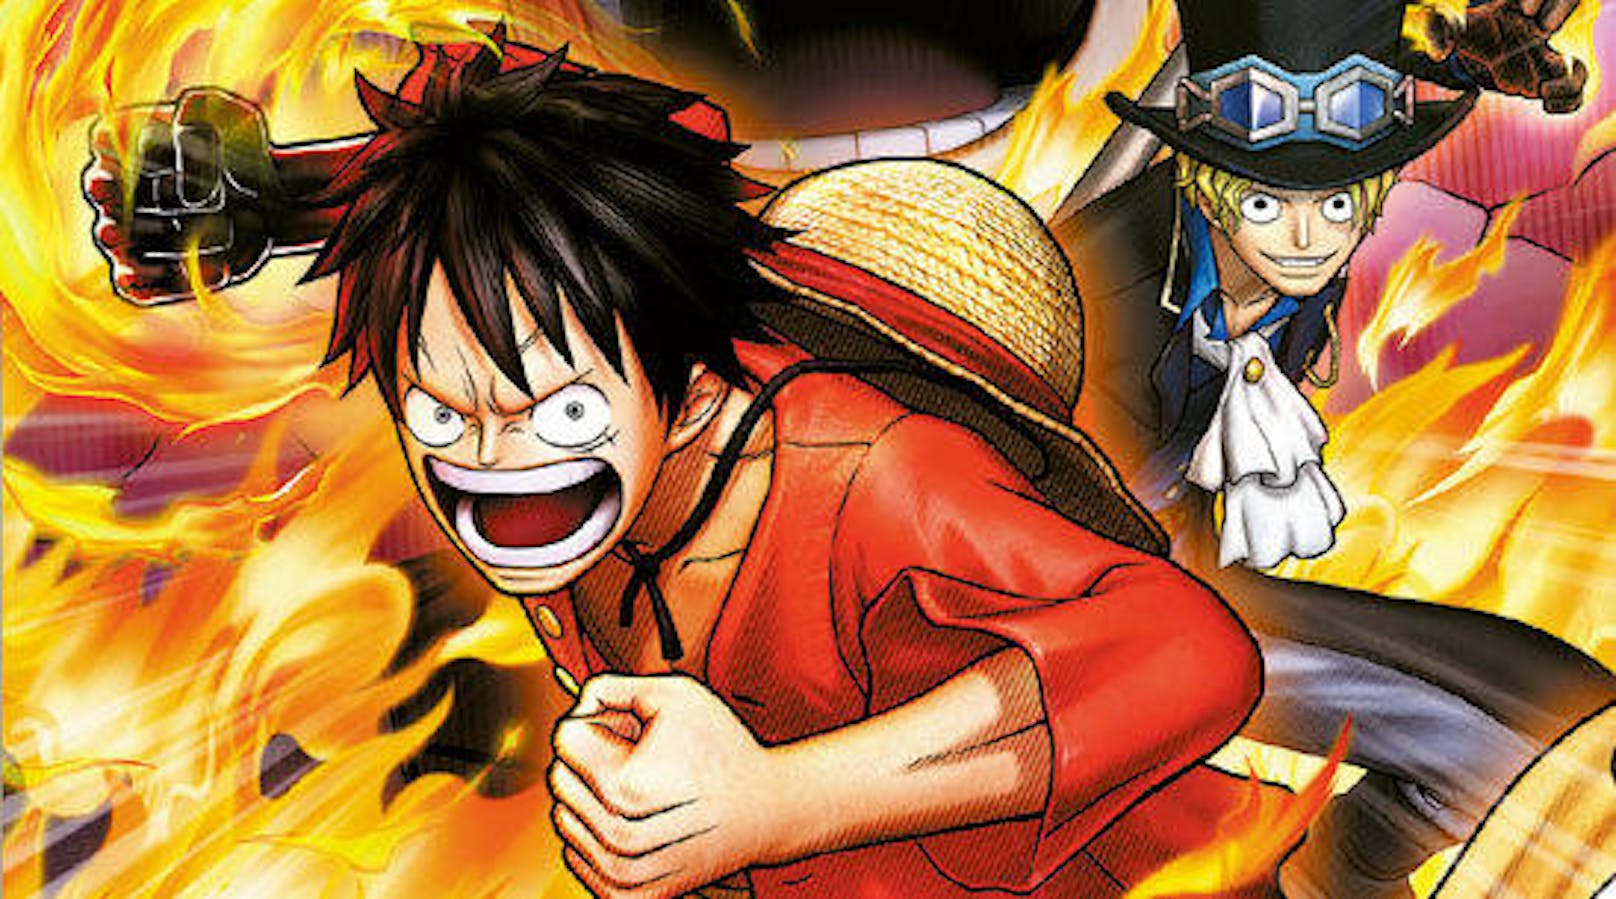  <a href="https://www.heute.at/digital/games/story/One-Piece-Pirate-Warriors-3-Deluxe-Edition-Test-Review-Nintendo-Switch-57008331" target="_blank">One Piece: Pirate Warriors 3 Deluxe Edition</a>